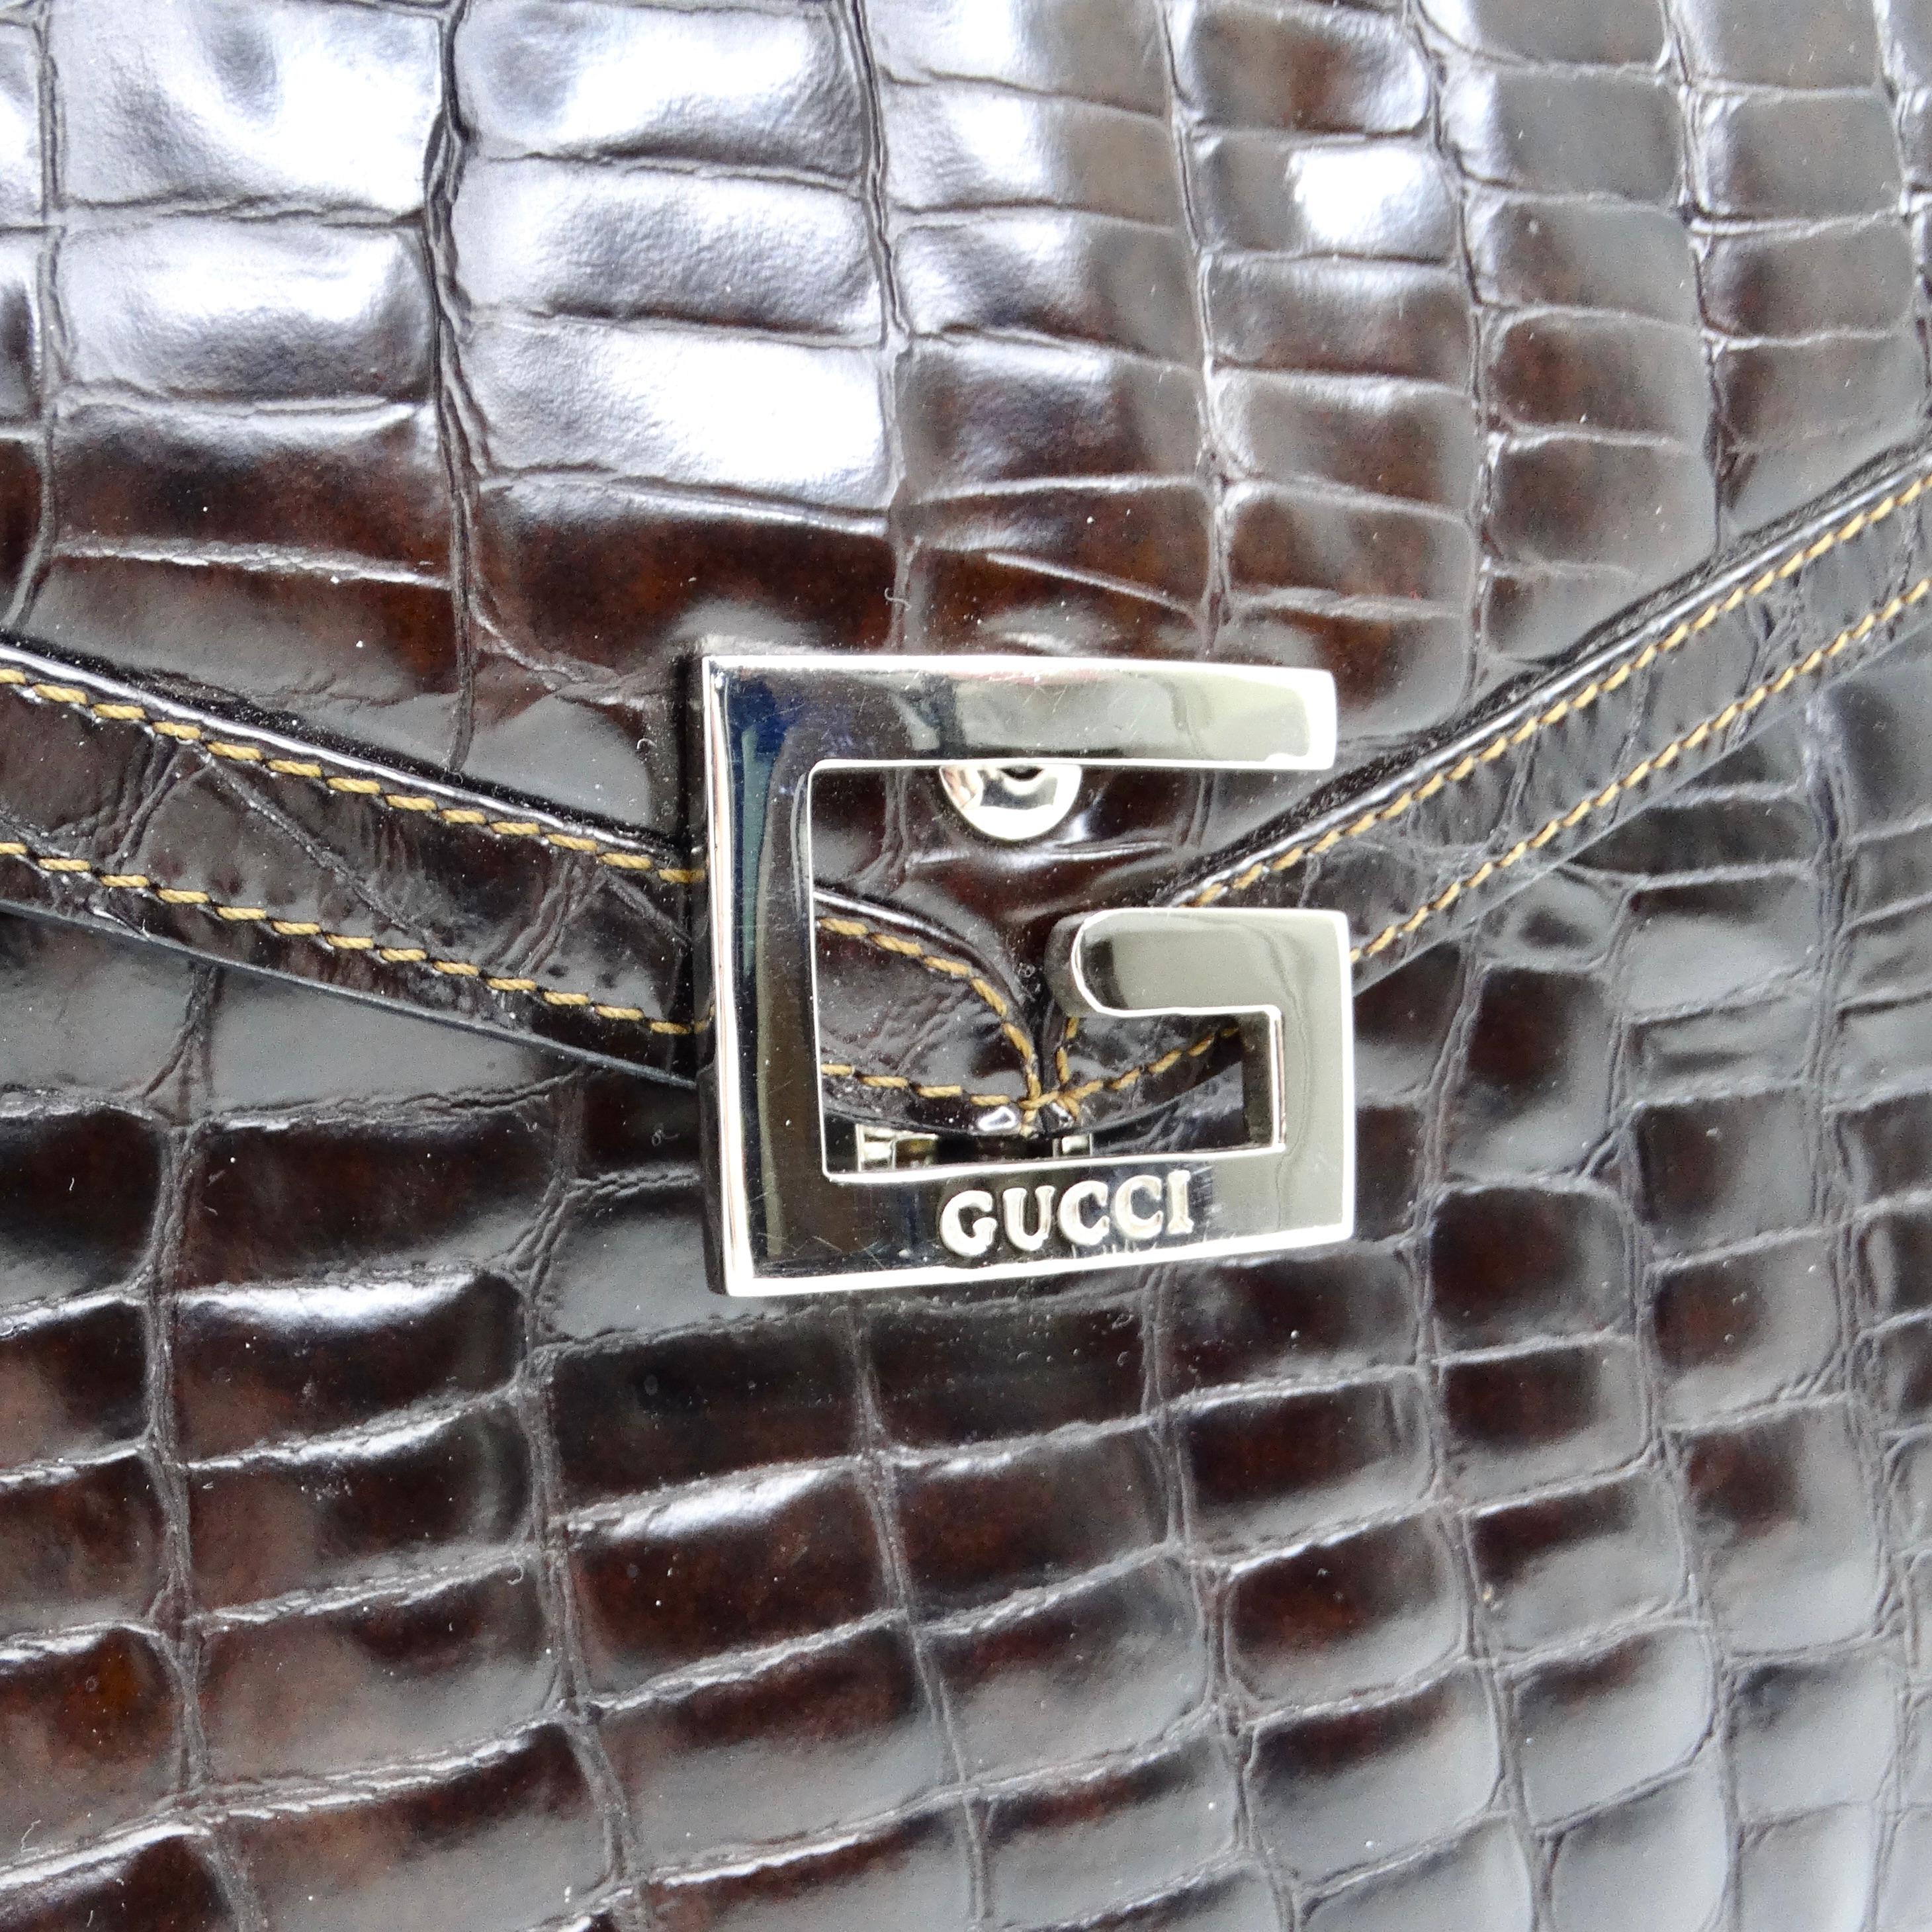 The Gucci 1980s Alligator Embossed Leather Handbag is a luxurious and sophisticated accessory that adds a touch of elegance to any ensemble. Crafted from brown leather with an alligator embossed texture, this top handle handbag exudes timeless charm